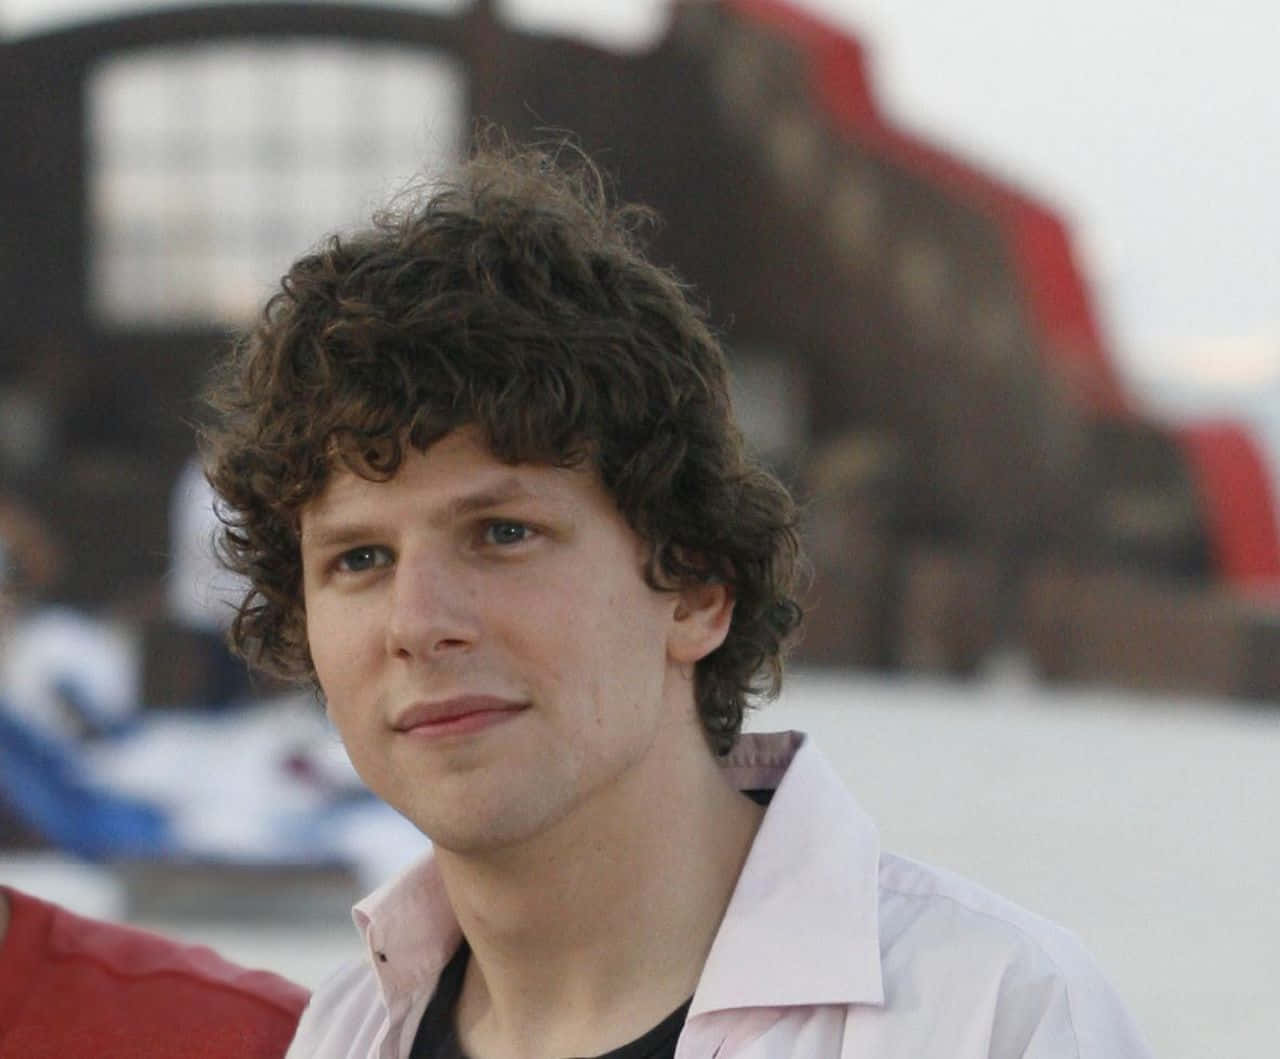 Caption: Hollywood actor Jesse Eisenberg gazing into the distance Wallpaper